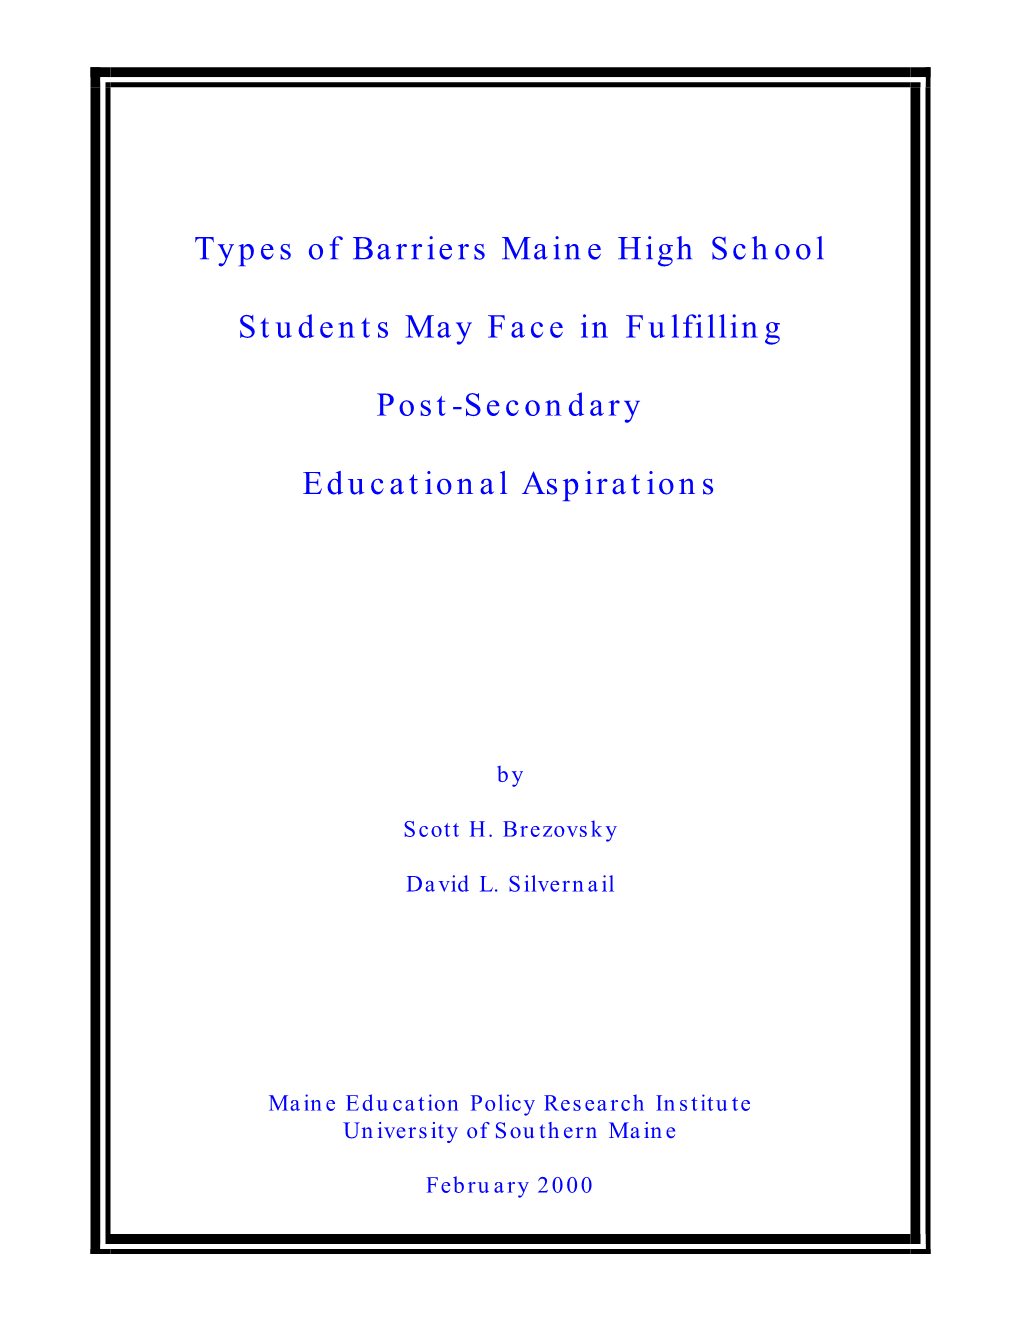 Barriers to Participation in Higher Education Do Maine’S Students Encounter